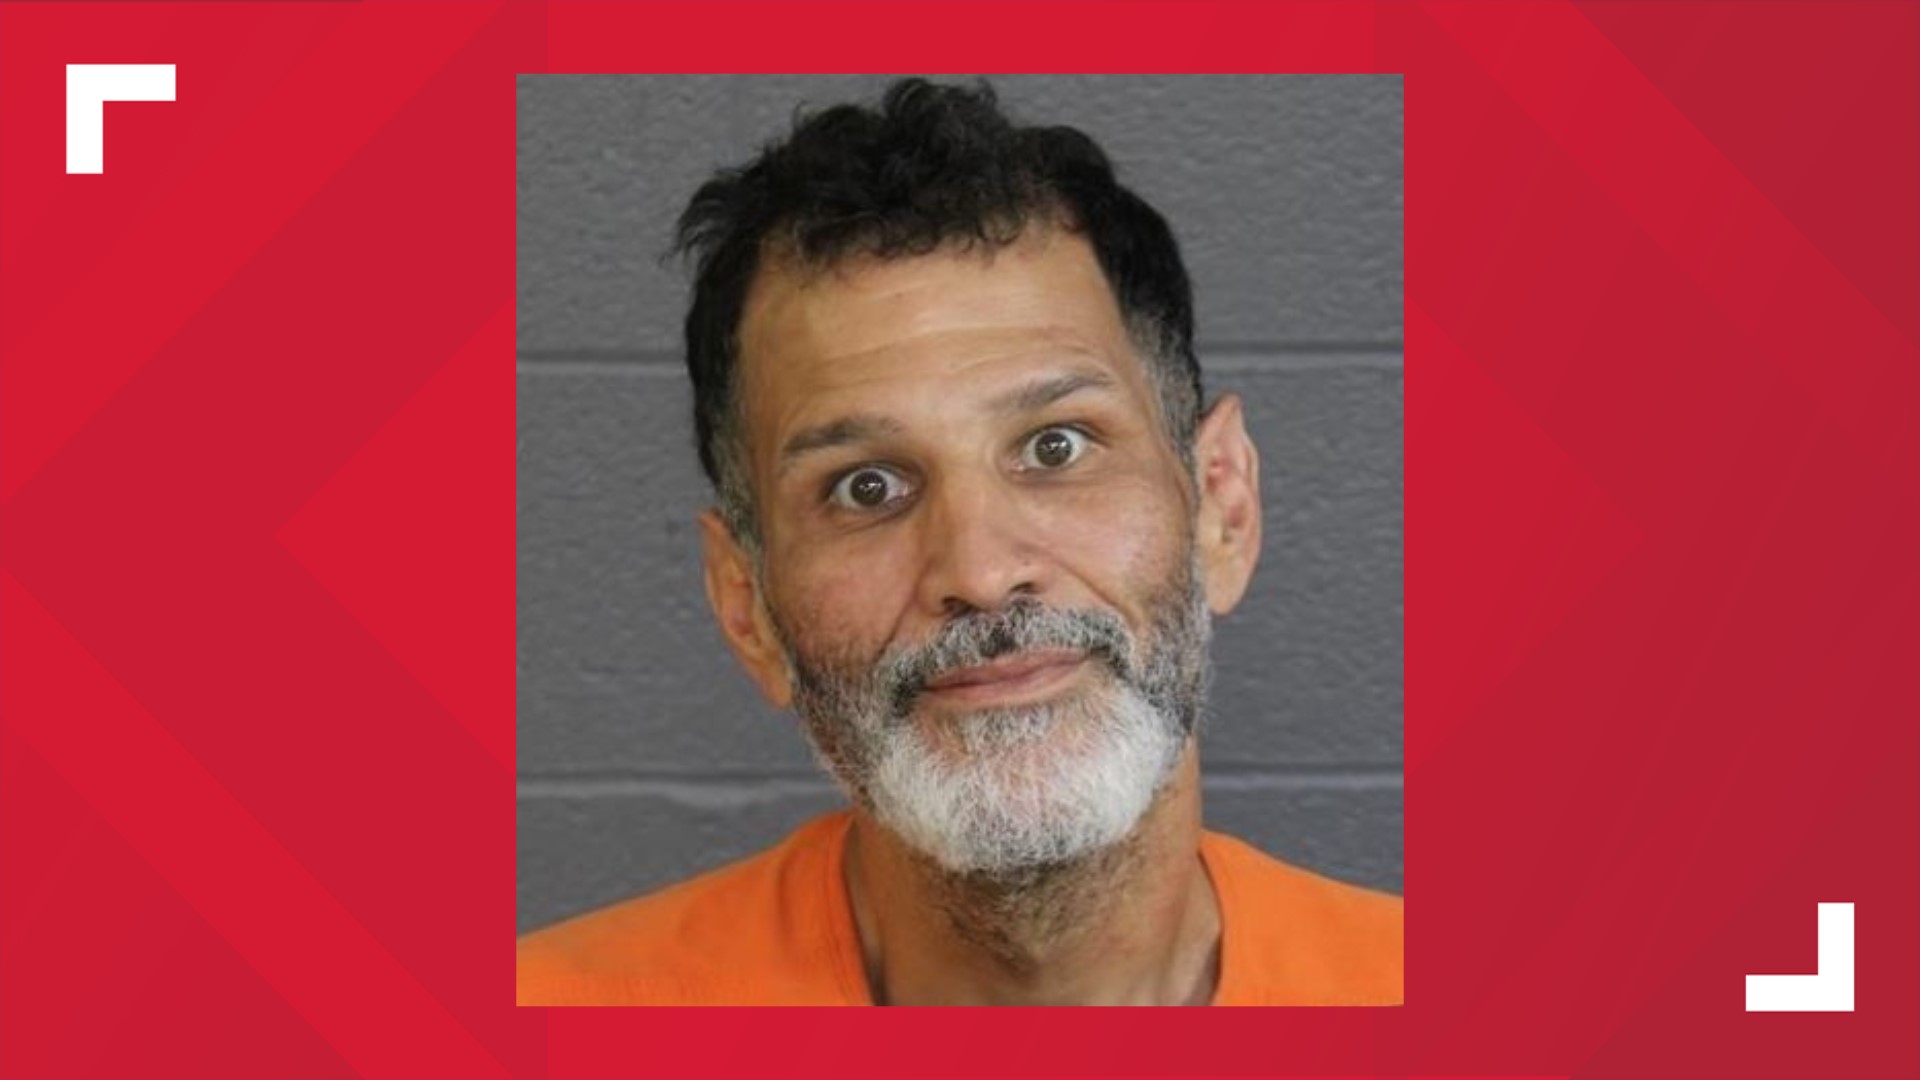 The 67-year-old victim was found in a home on the first block of S. Main St. in Dover Tuesday. William Emilio Torres Gautier, 42, is charged in her death.